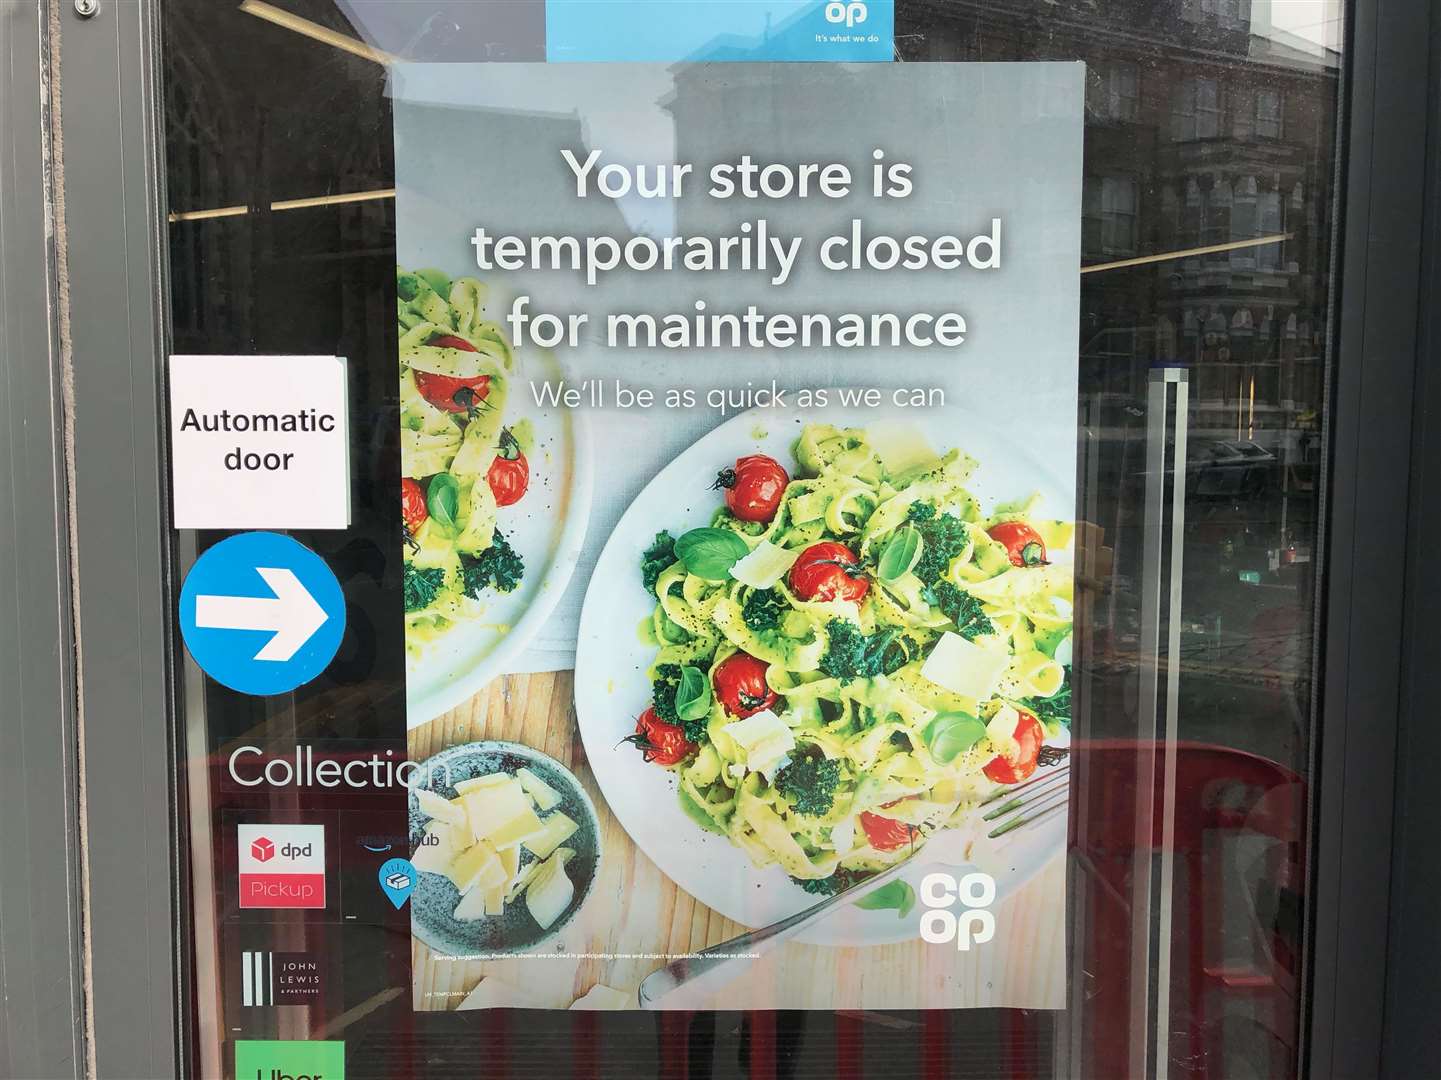 The shop has put up new signs informing shoppers of the closure